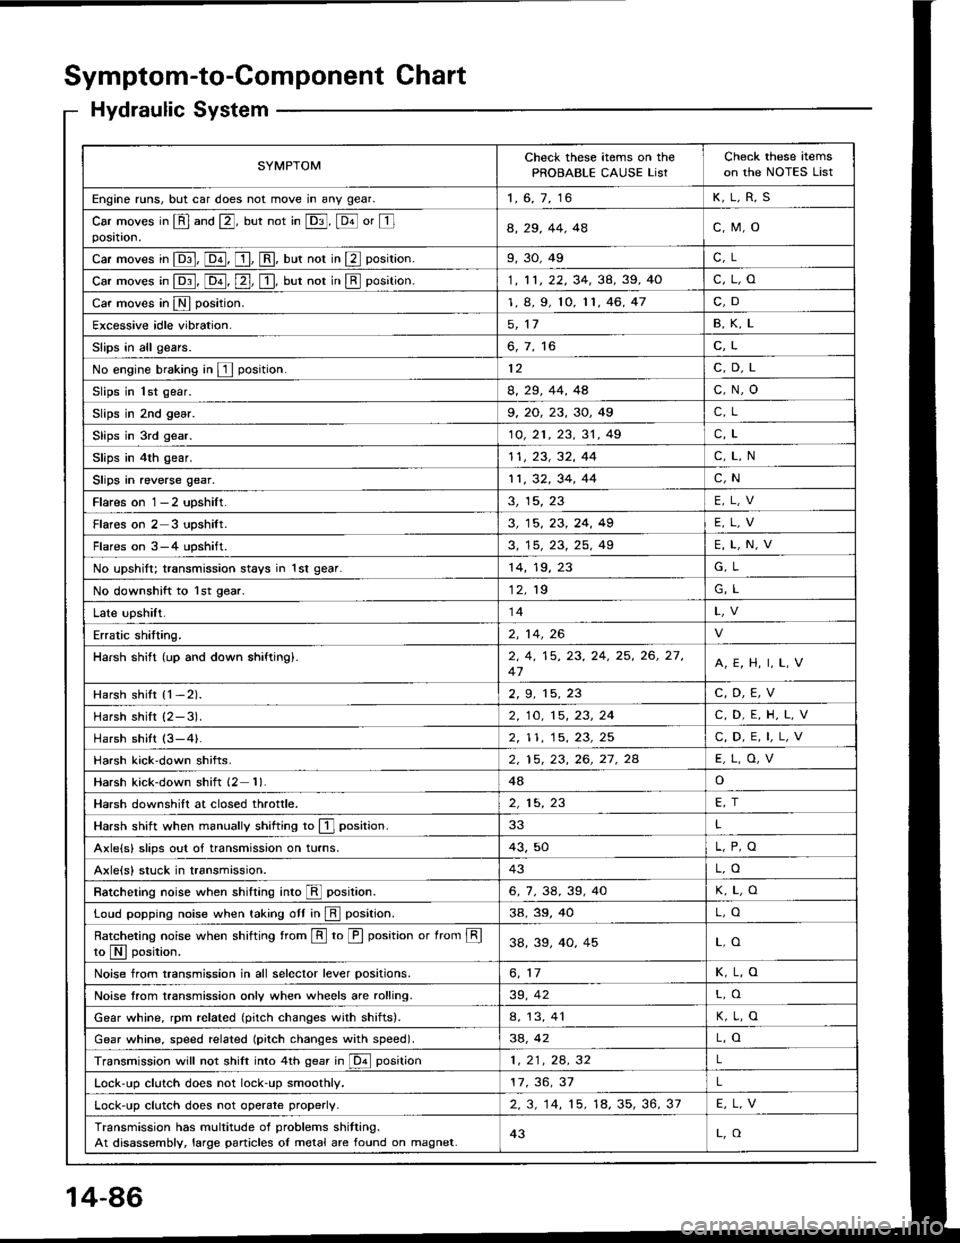 ACURA INTEGRA 1994  Service Repair Manual Symptom-to-Component Chart
Hydraulic System
SYMPTOMCheck these items on the
PROBABLE CAUSE ListCheck these items
on the NOTES List
Engine runs, but car does not move in any gear.1, 6, 7, 16K,L,R,S
Car